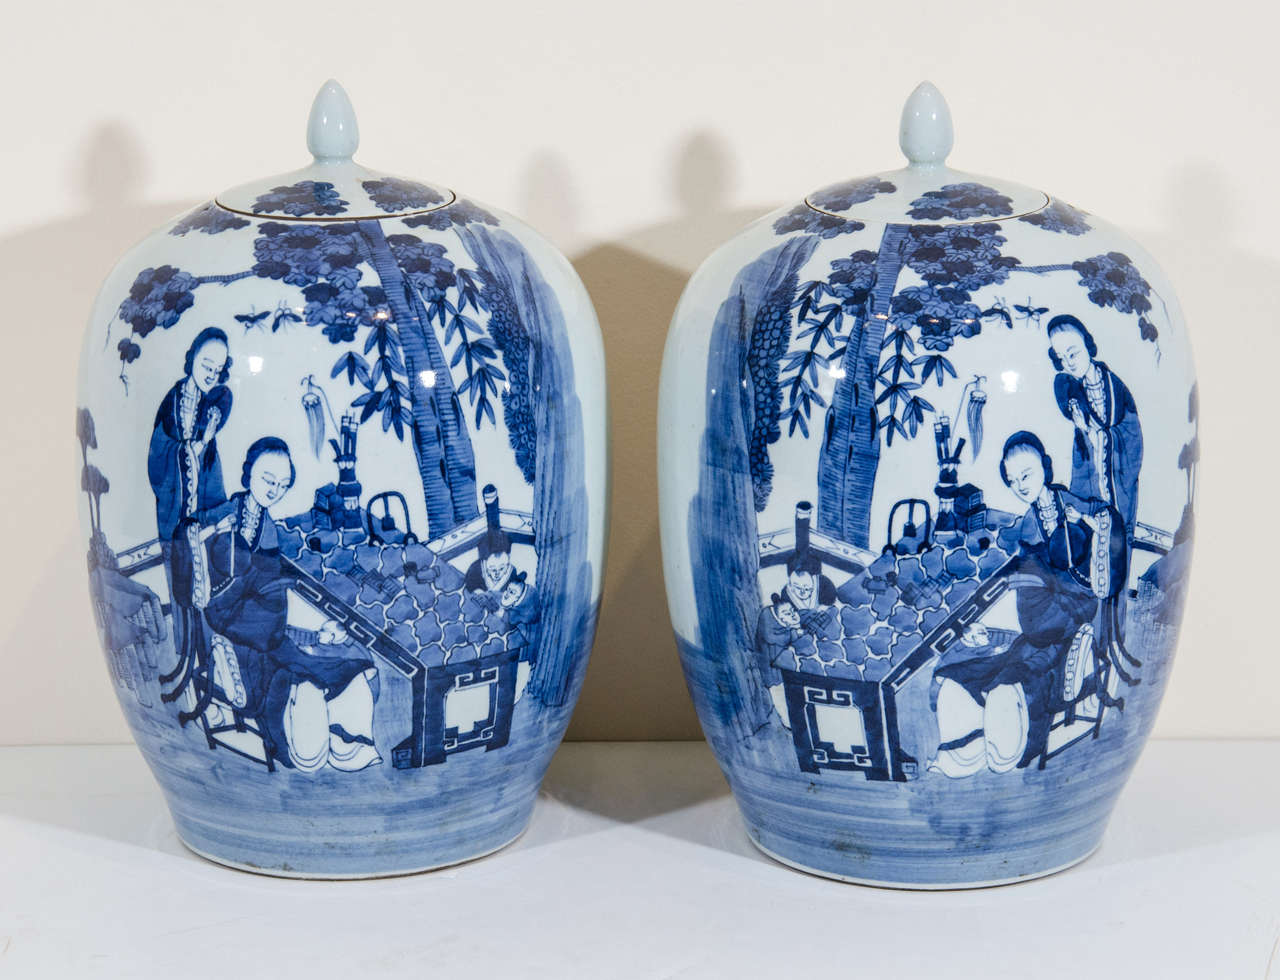 Beautifully painted porcelain ginger jars with lids. From Shanxi Province, China, c. 1900.  
Sold individually. Two pieces available.
CR562
abhayatribeca.com
212.431.6931